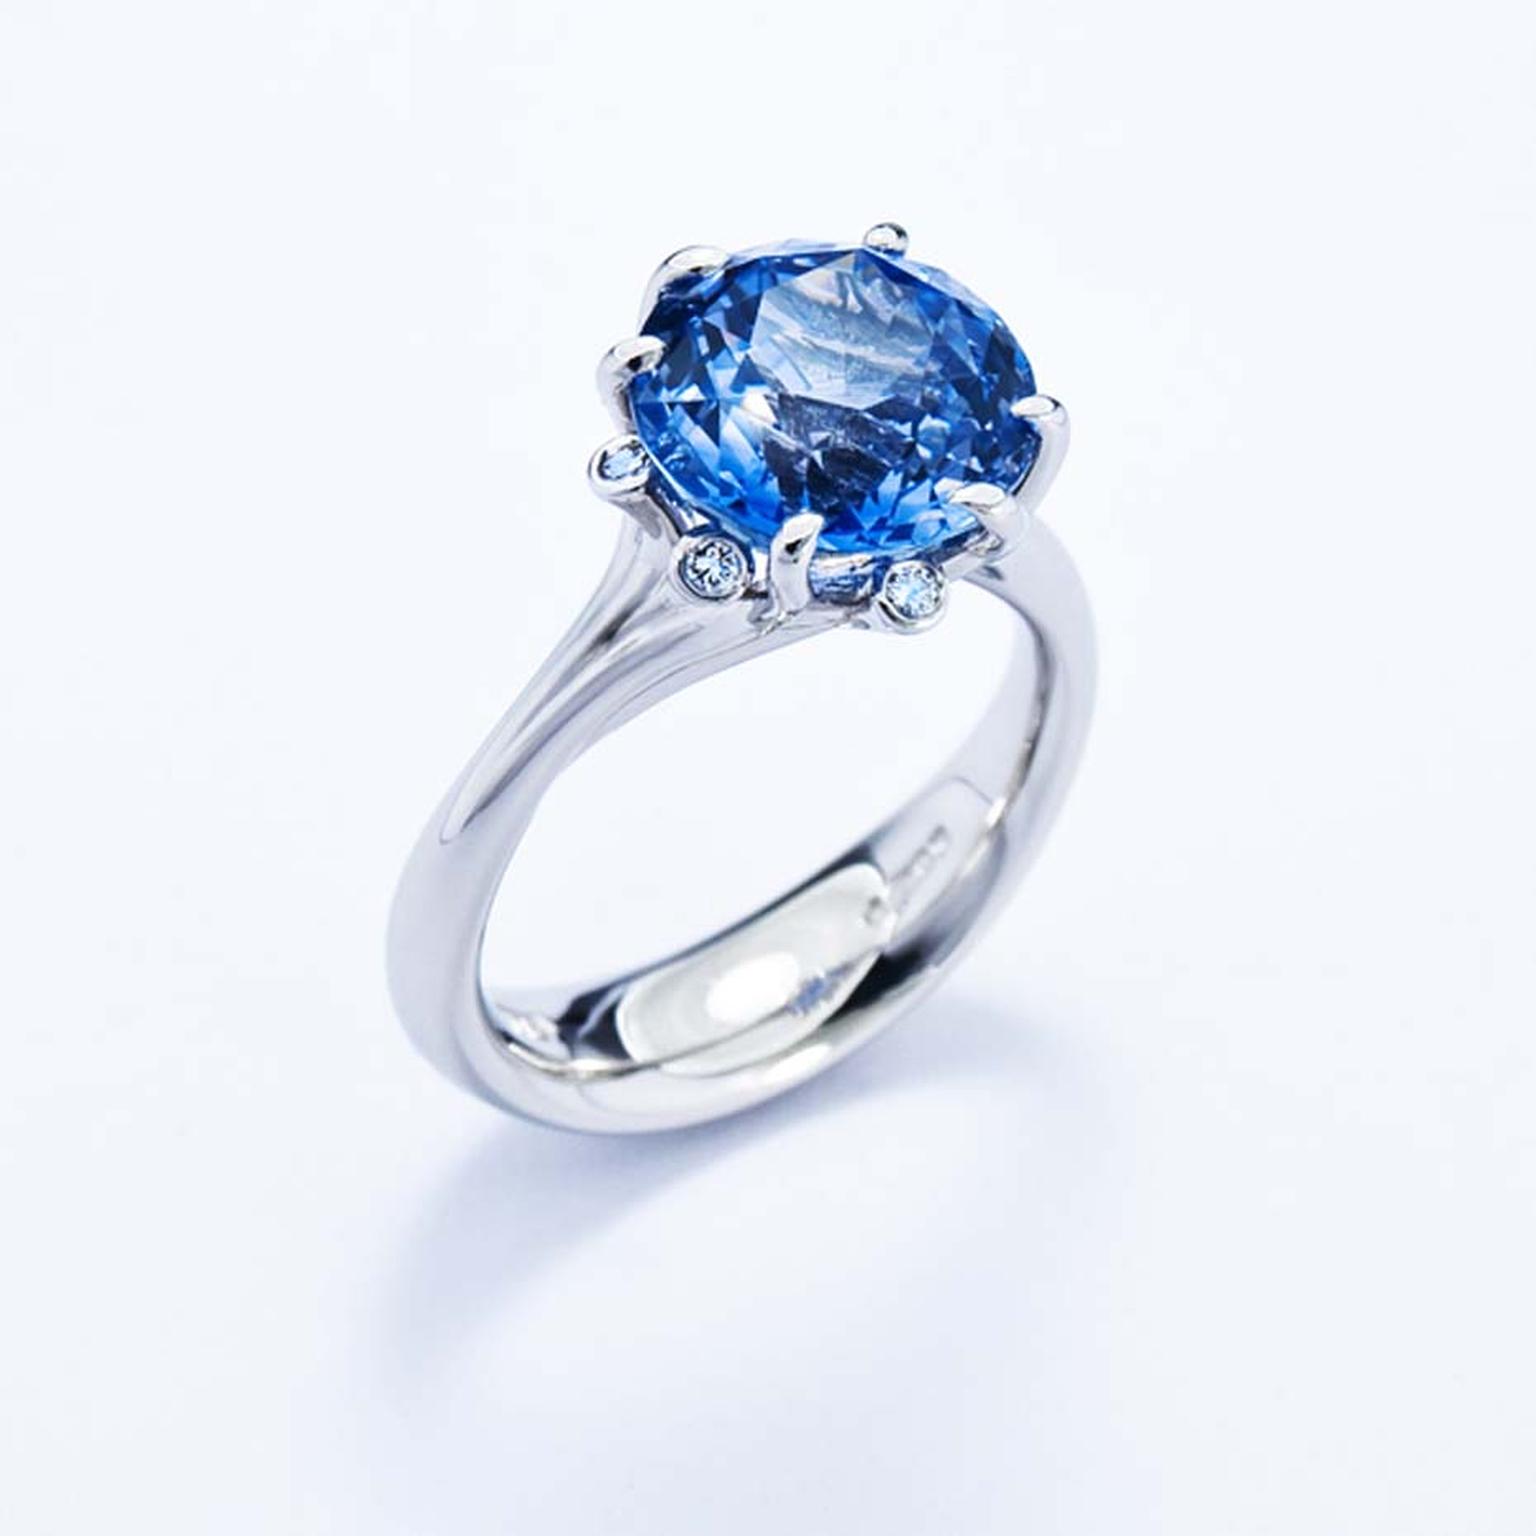 Jon Dibben Meadow ring with a centre sapphire set in platinum.